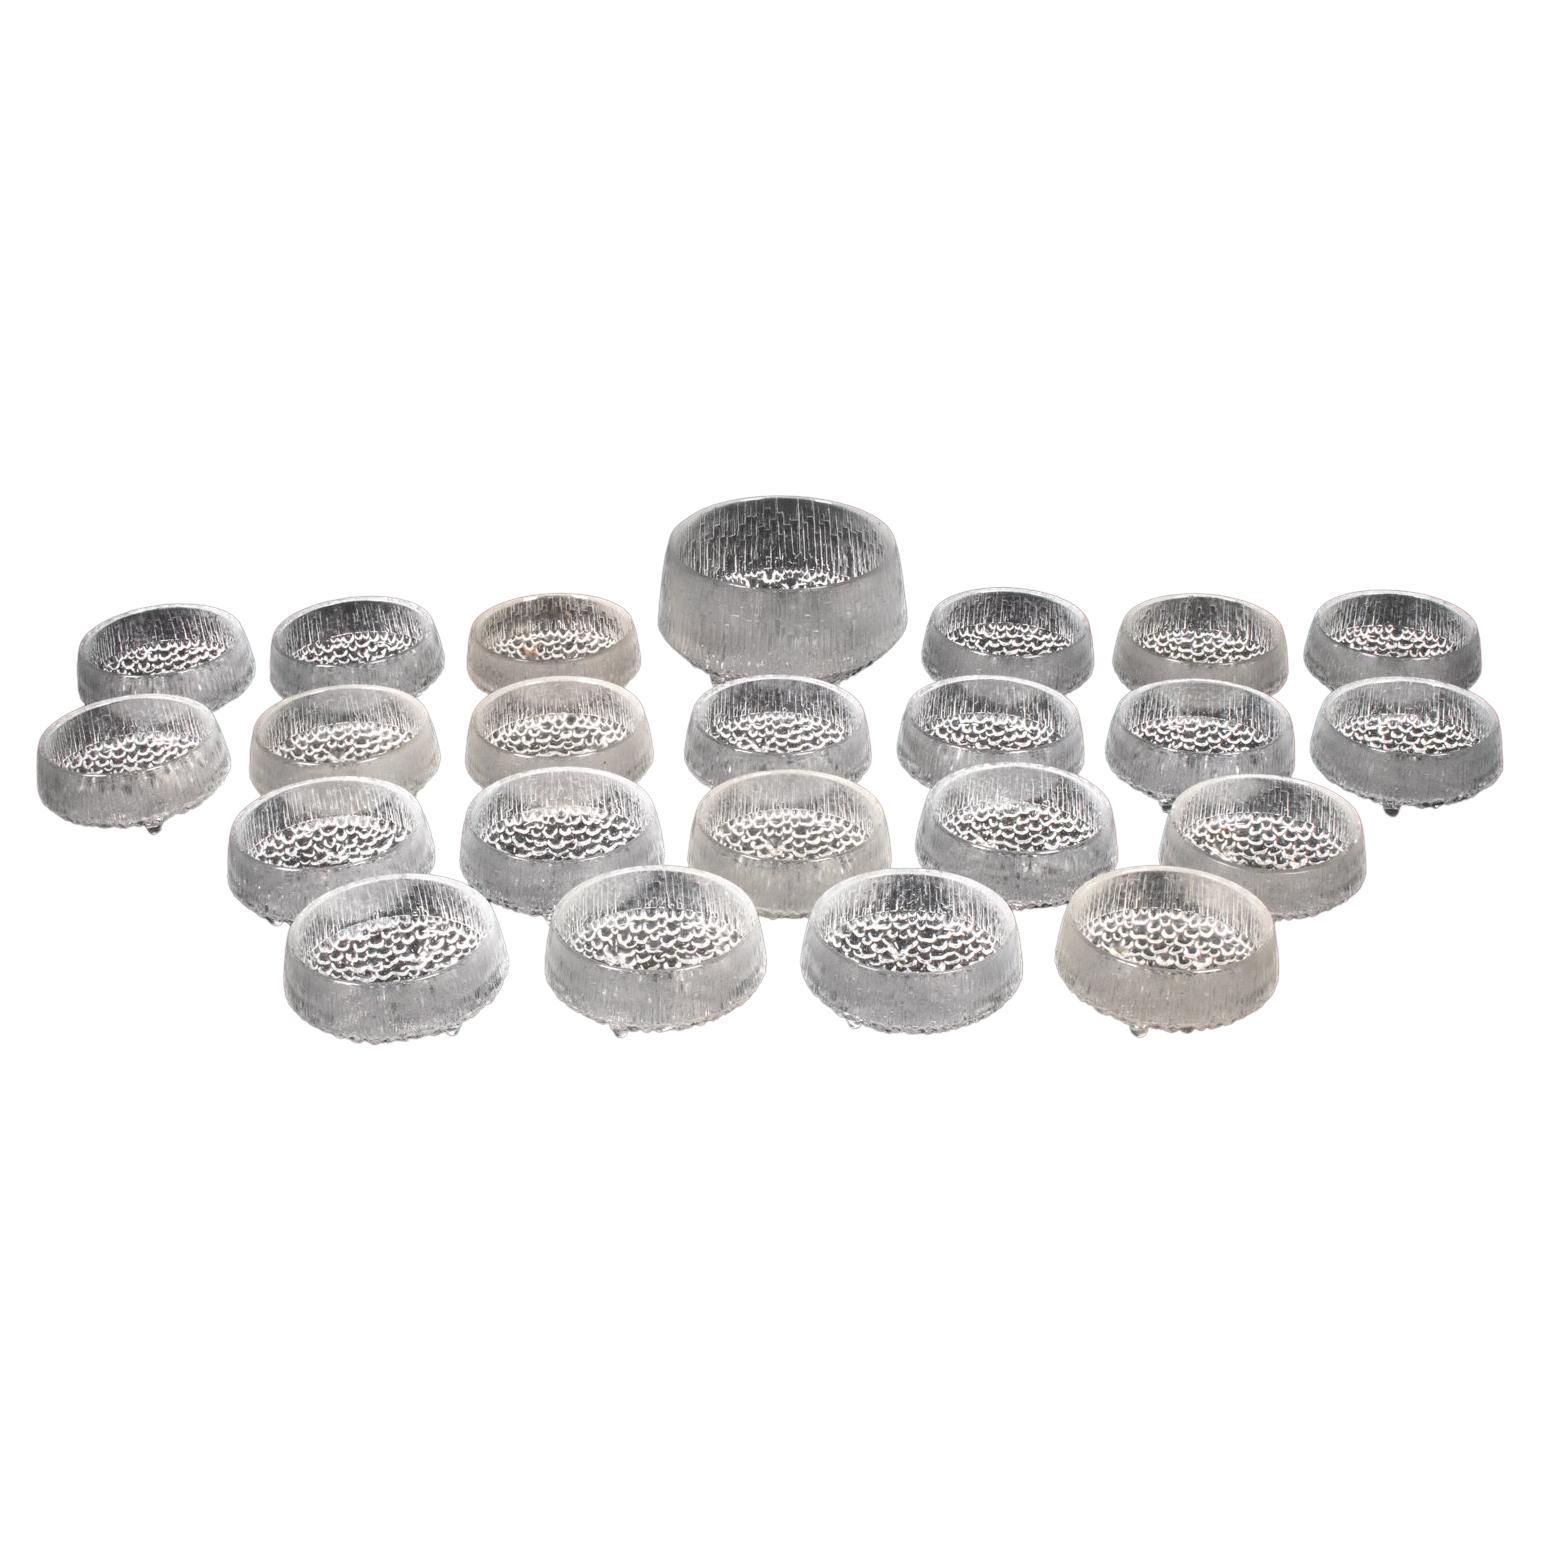 Tapio Wirkkala for Iittala, "Ultima Thule" Glass Footed Serving & Dessert Bowls For Sale